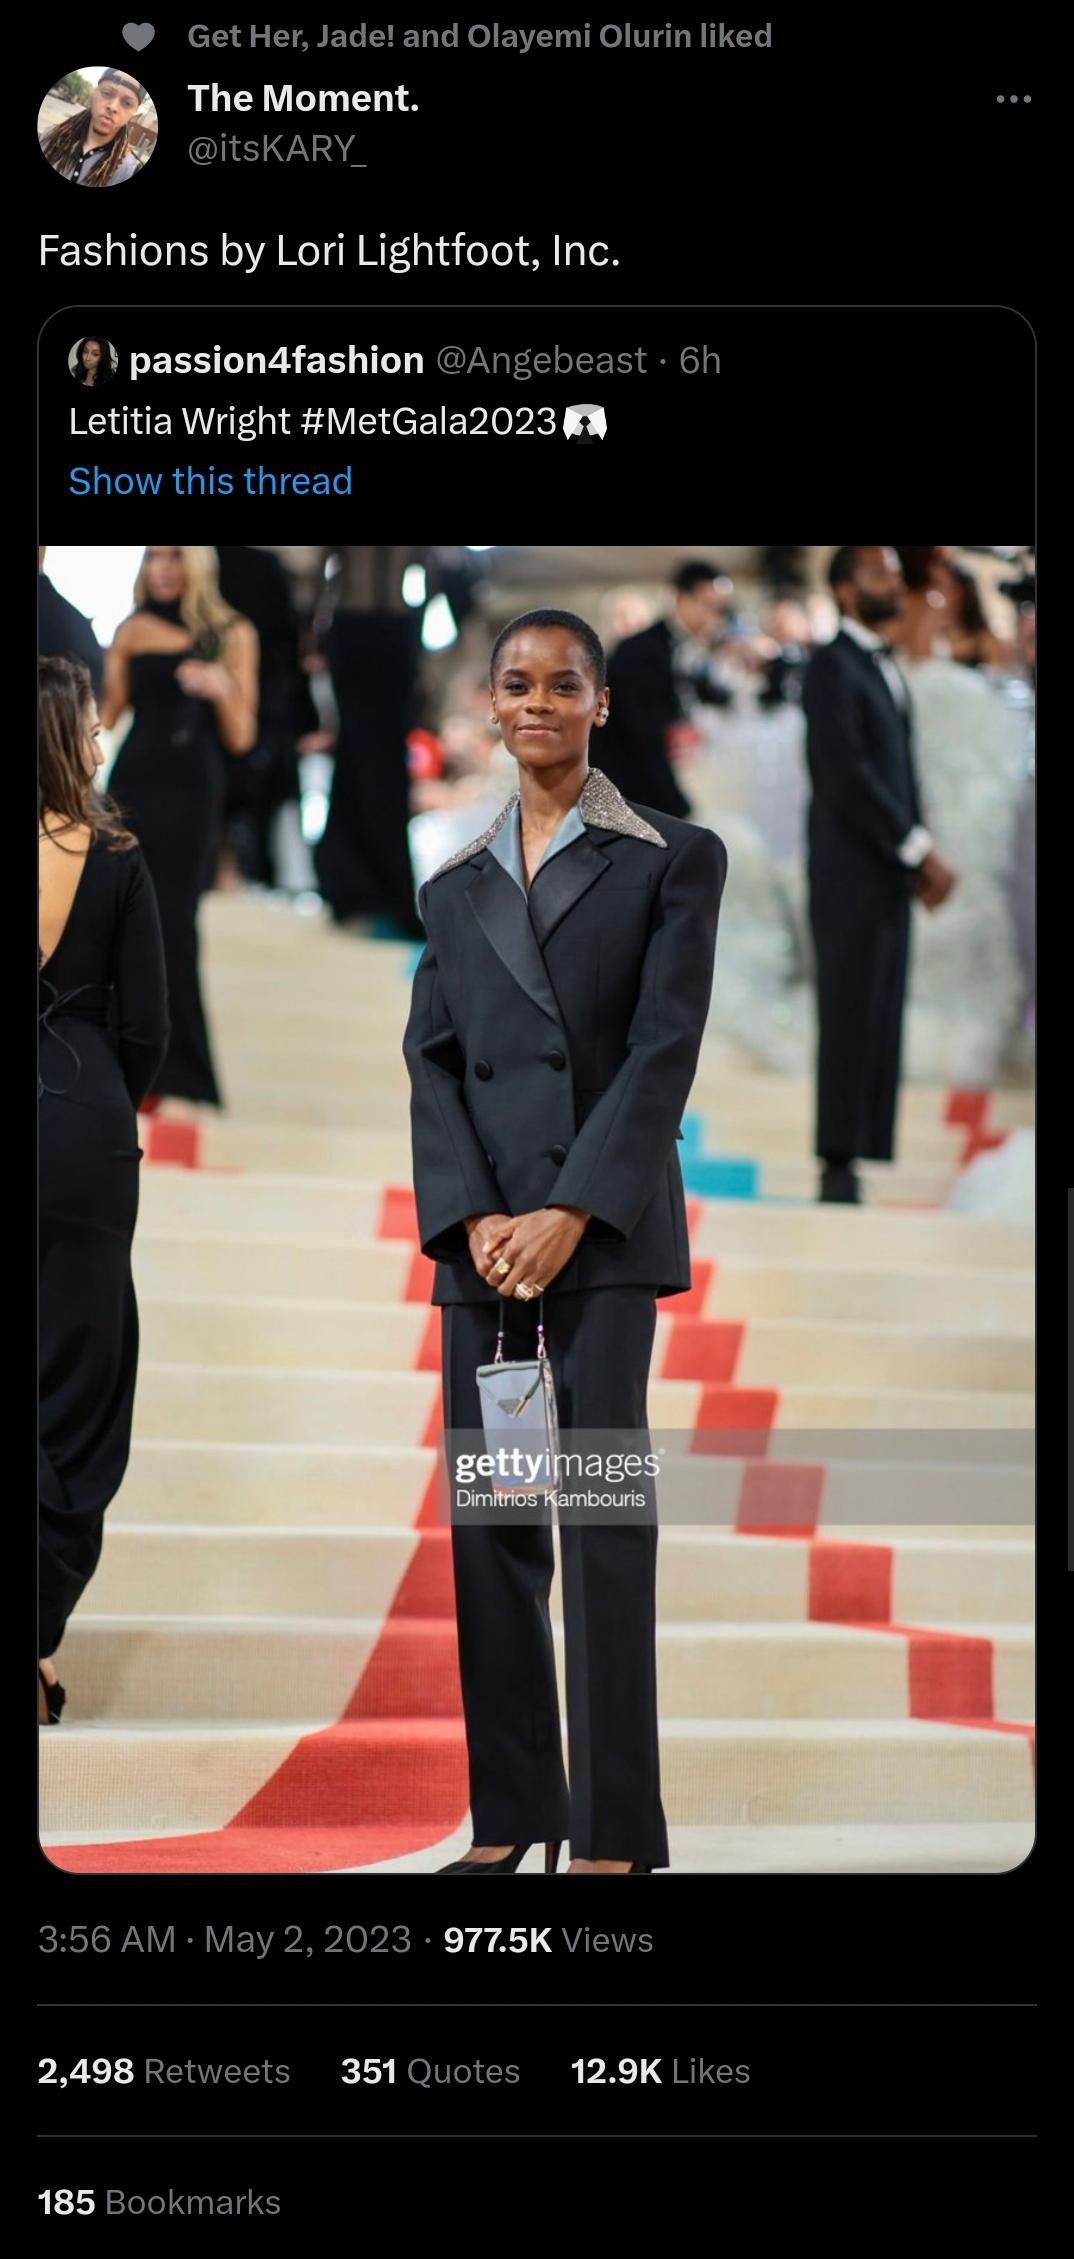 funny tweets and memes - gentleman - Get Her, Jade! and Olayemi Olurin d The Moment. Fashions by Lori Lightfoot, Inc. passion4fashion 6h Letitia Wright Show this thread gettyimages Dimitrios Kambouris Views 2,498 351 Quotes 185 Bookmarks